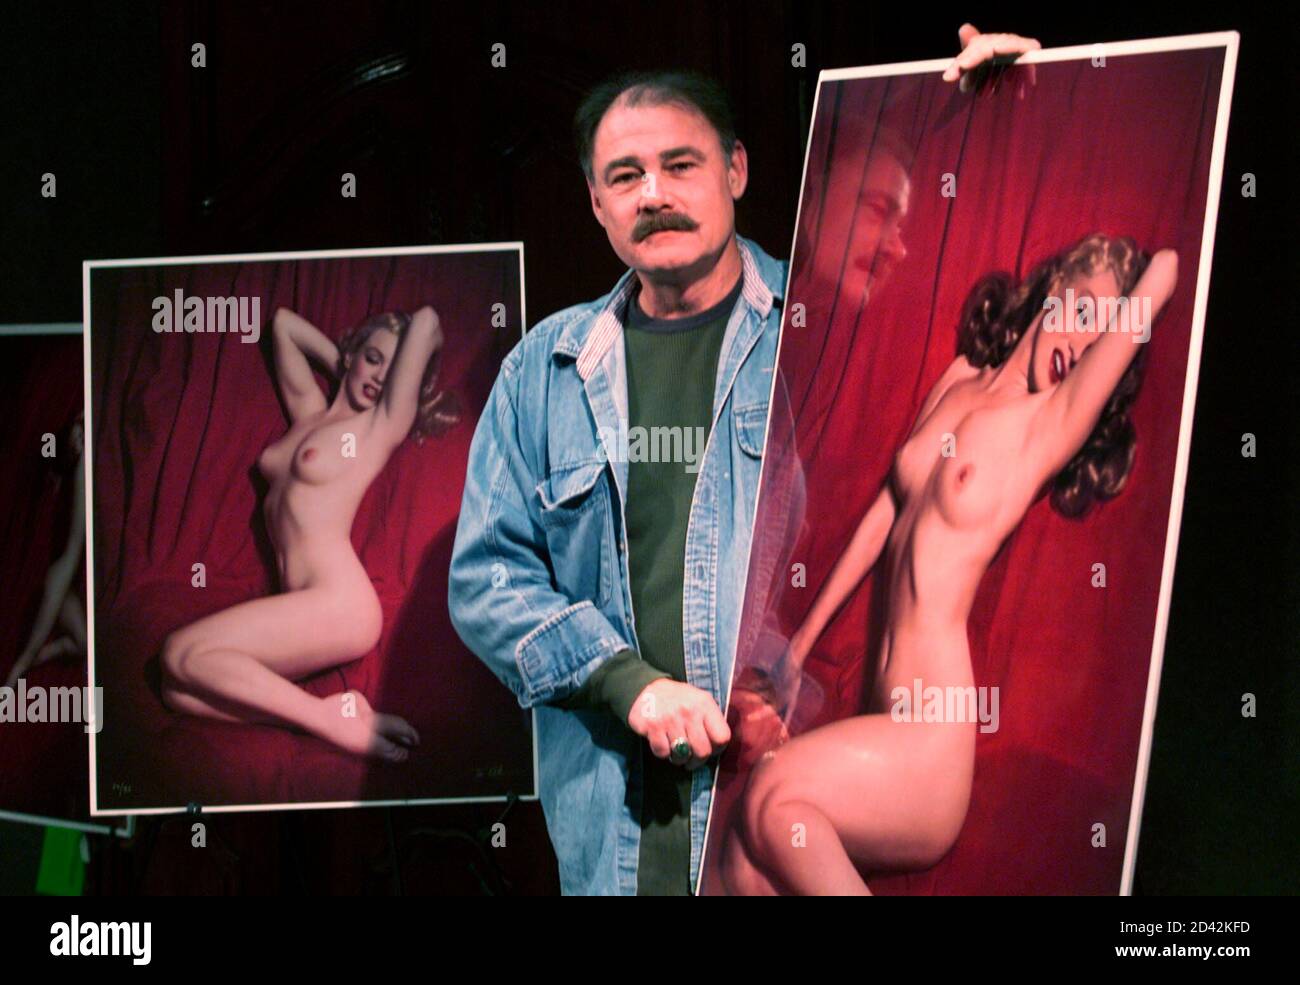 Tom Kelley Jr., son of the late photographer Tom Kelley Sr., poses at Butterfields auction house in Los Angeles March 1, 2001 with the famous 'Red Velvet' series of photographs of Marilyn Monore taken by his father during a Hollywood photo shoot in 1949. The photograph at (R) will be sold only as one of four fine art prints, but the negatives from the photo (L) and other from the shoot as well as the intellectual property rights will be sold with an opening bid of $700,000 at auction March 22 in Los Angeles and via the Internet. The items were displayed during a media preview March 1, 2001 in  Stock Photo